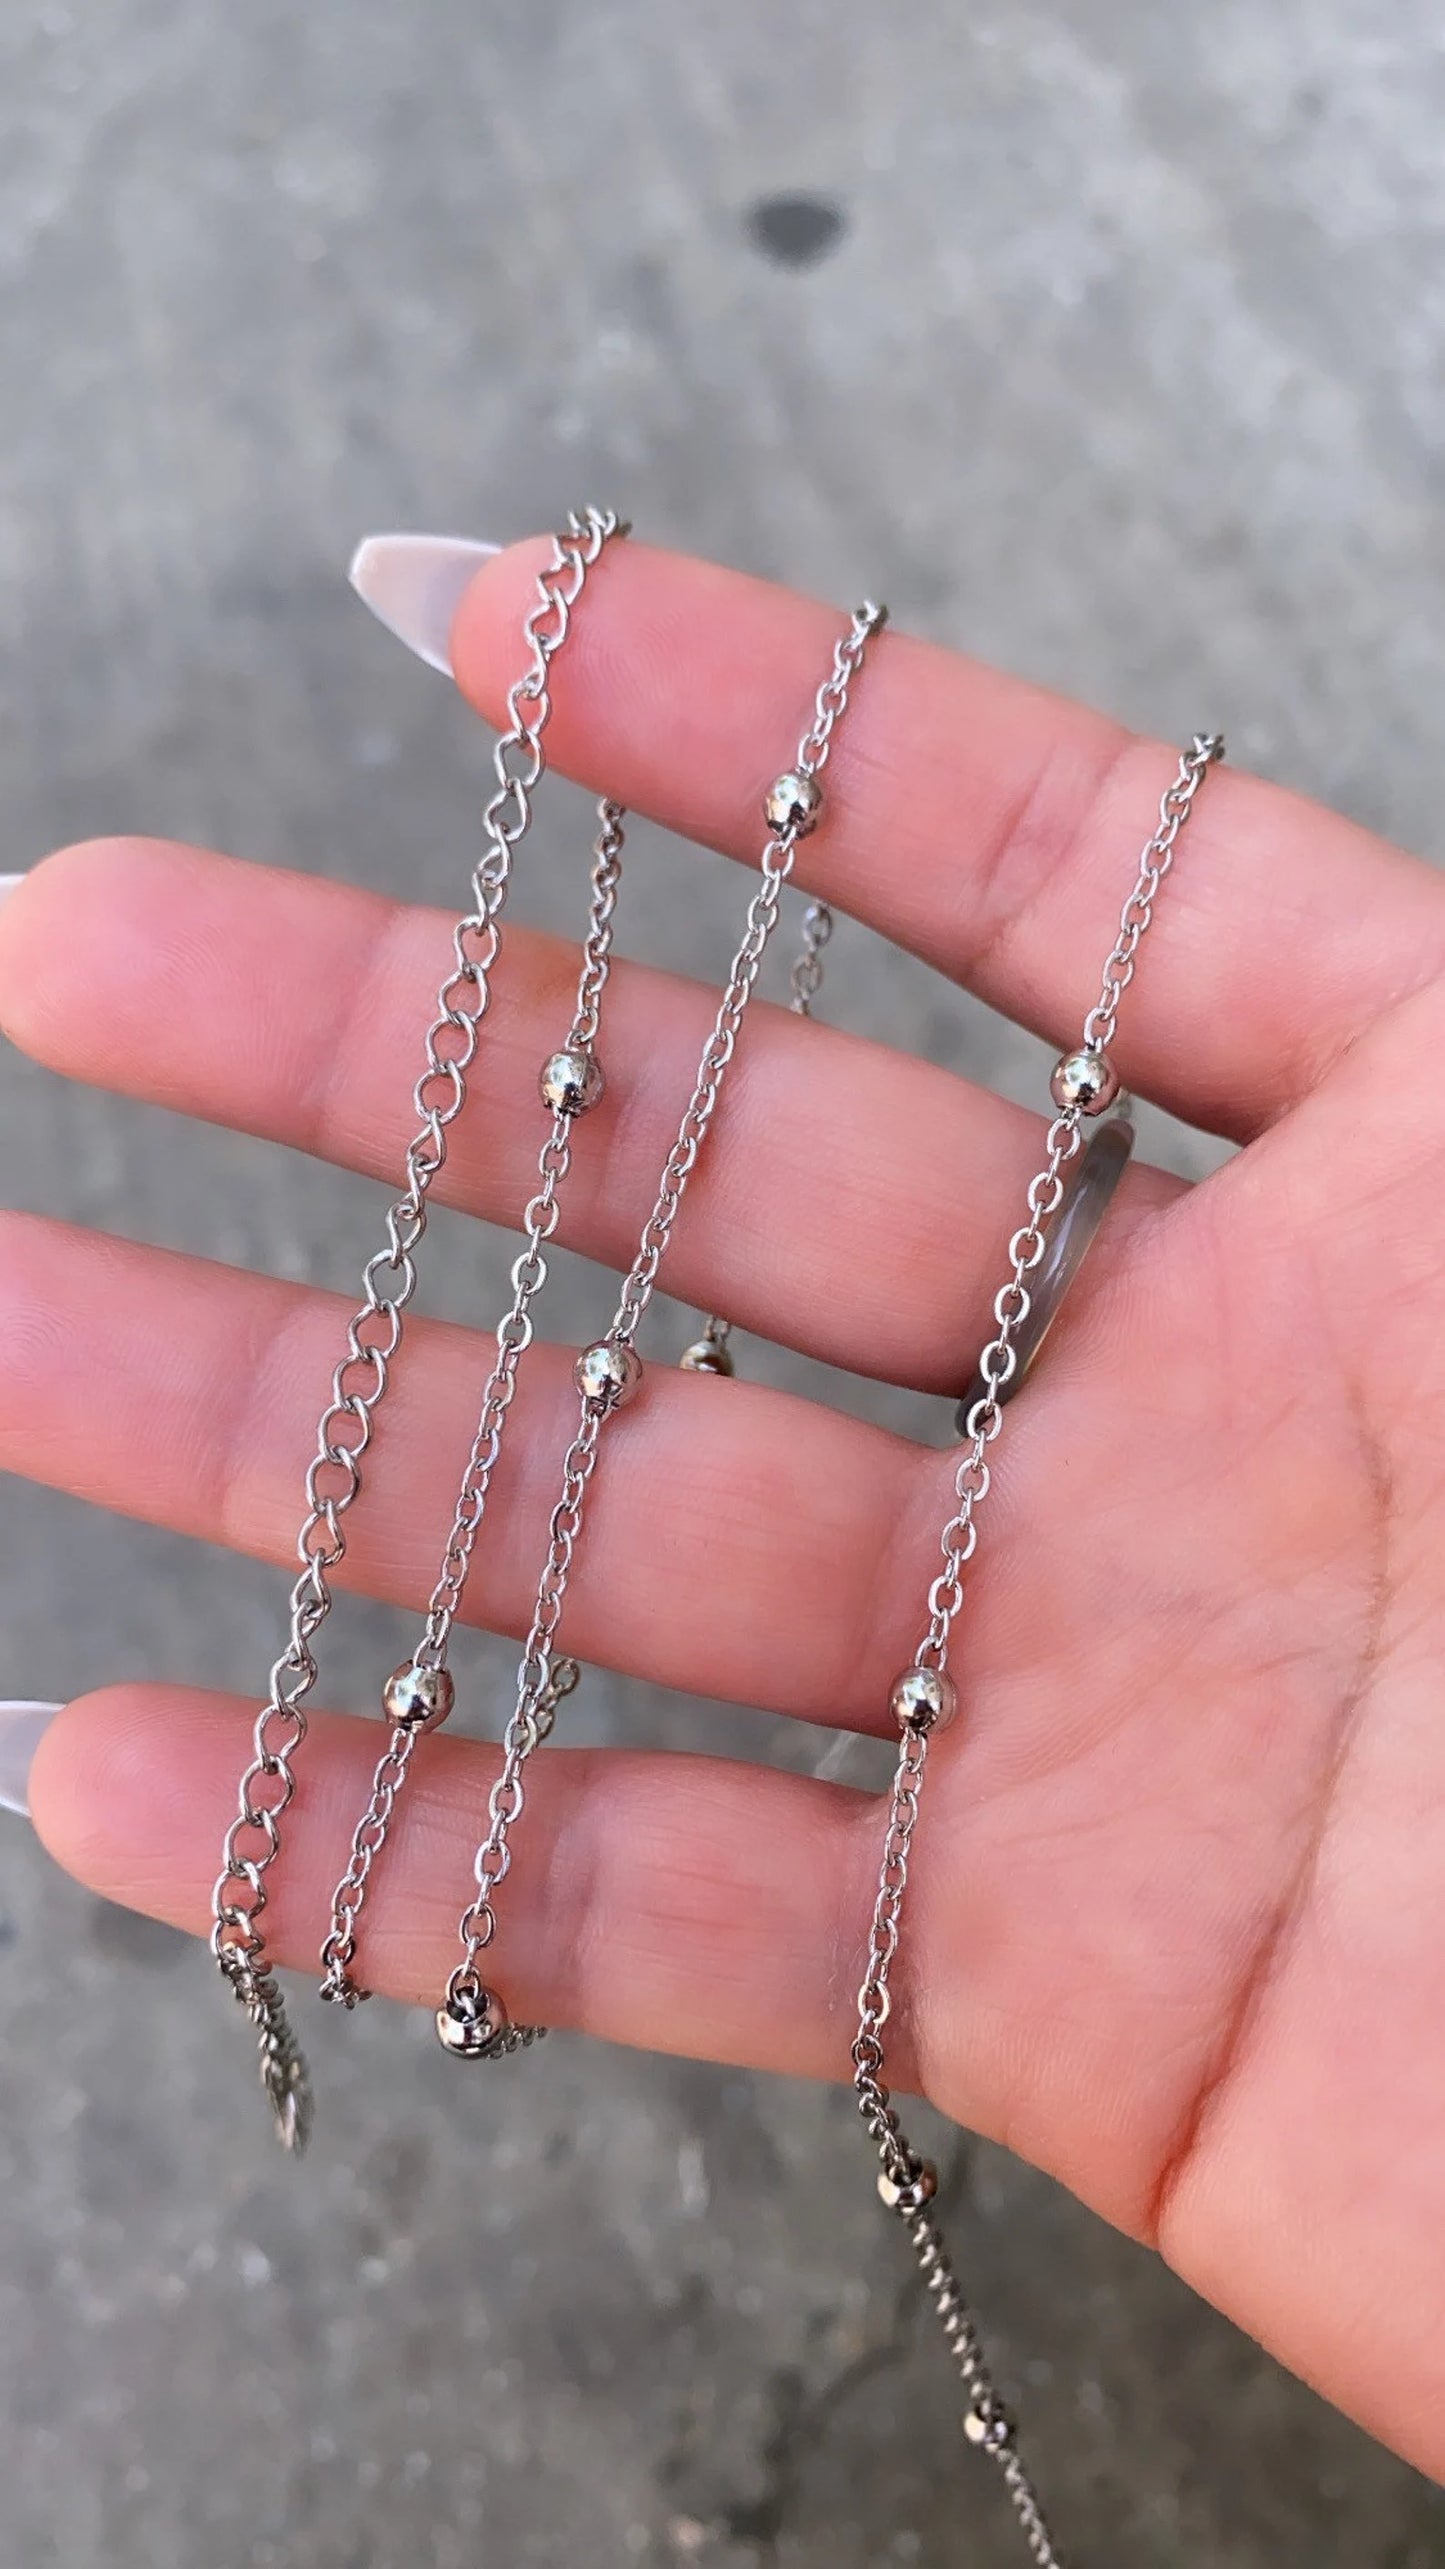 SILVER STAINLESS STEEL BALL WAIST CHAIN | BELLY CHAIN